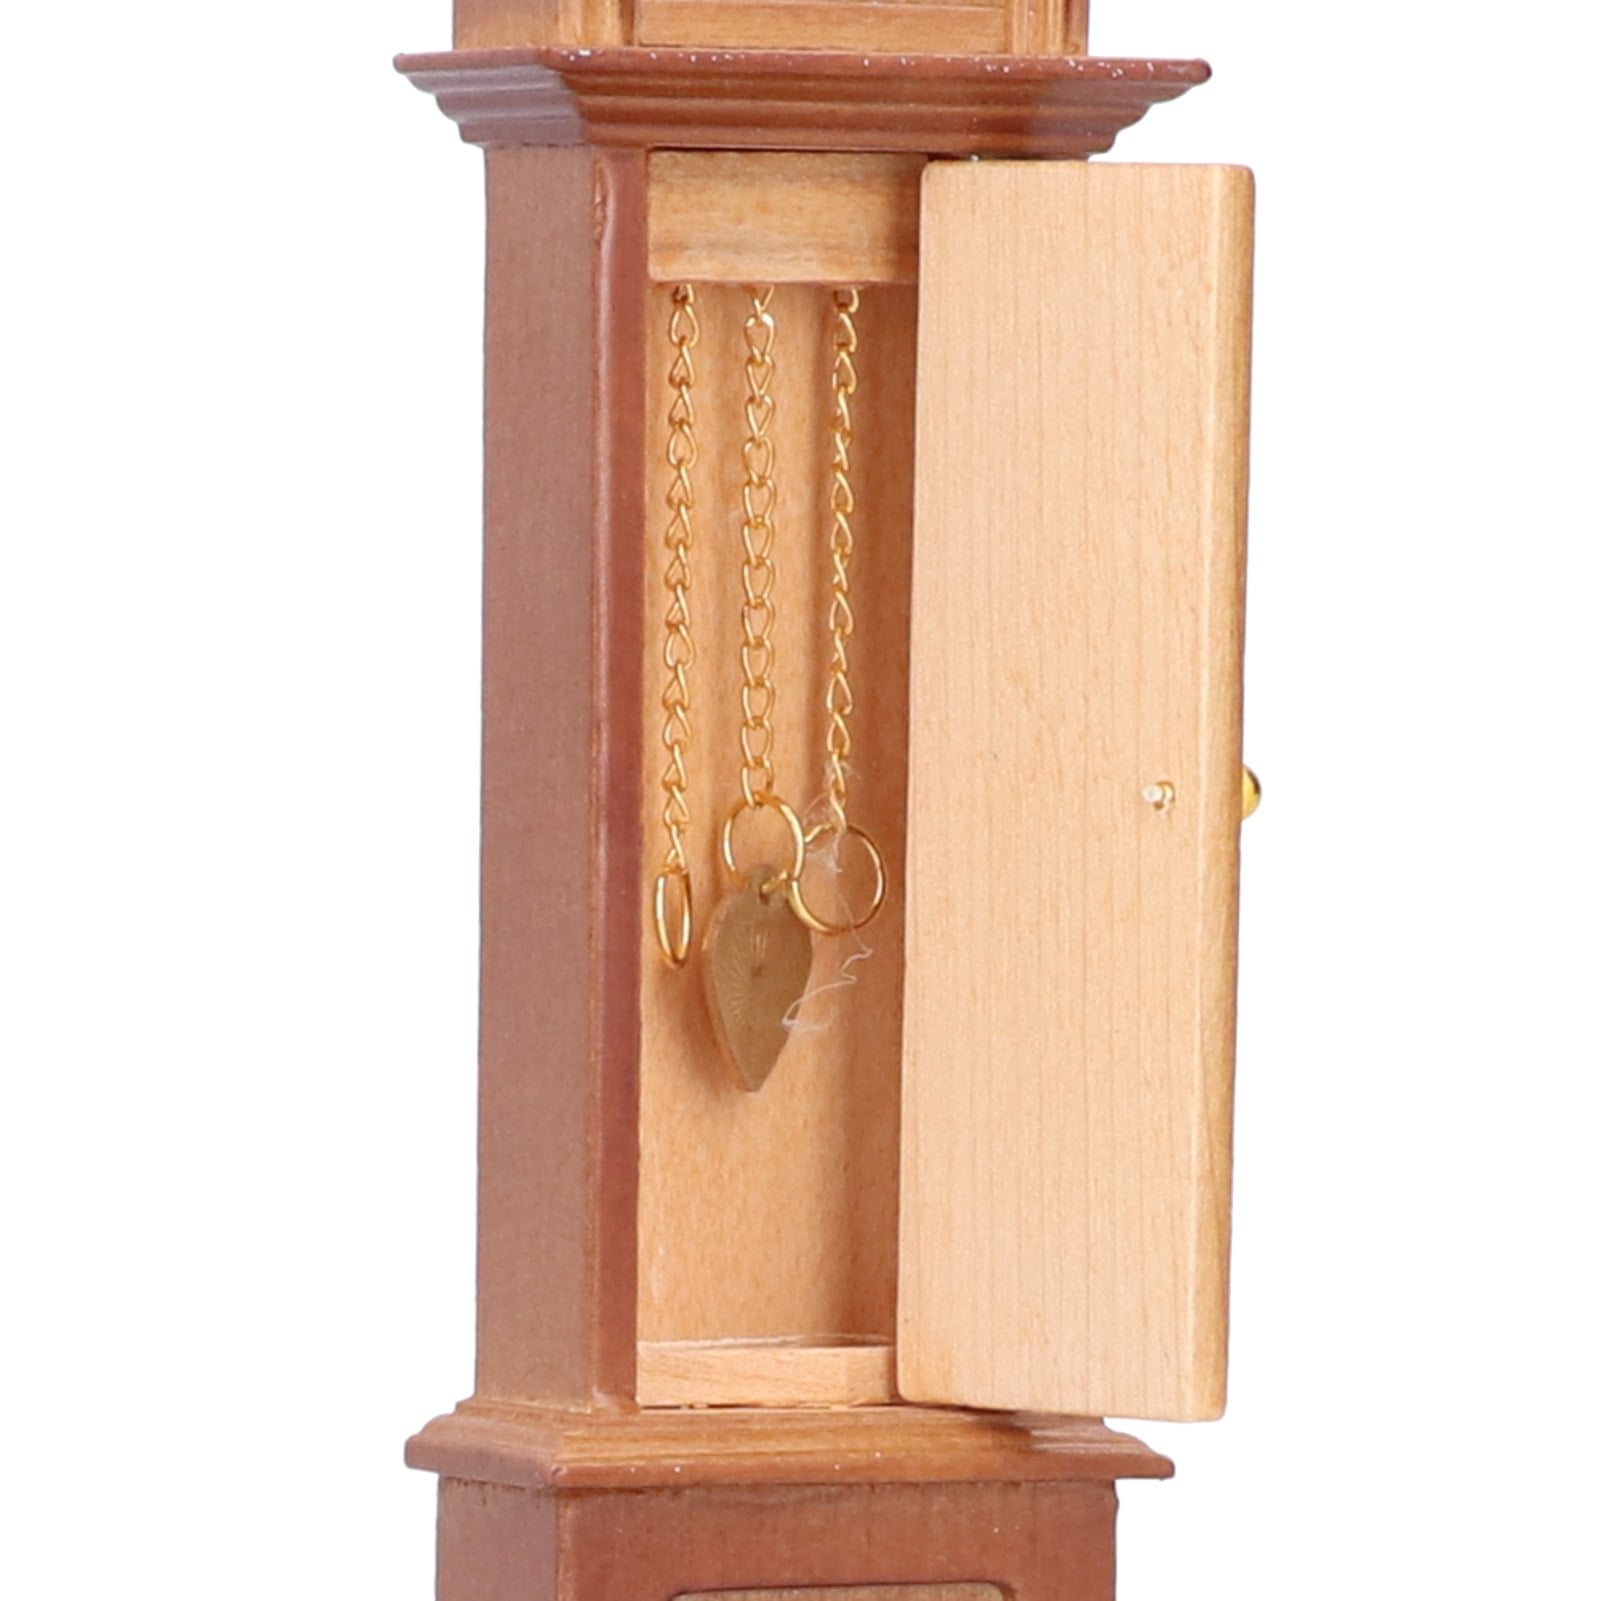 Miniature Wooden Classical Desk Clock for 1:12 Scale Dollhouse Furniture Parts! 